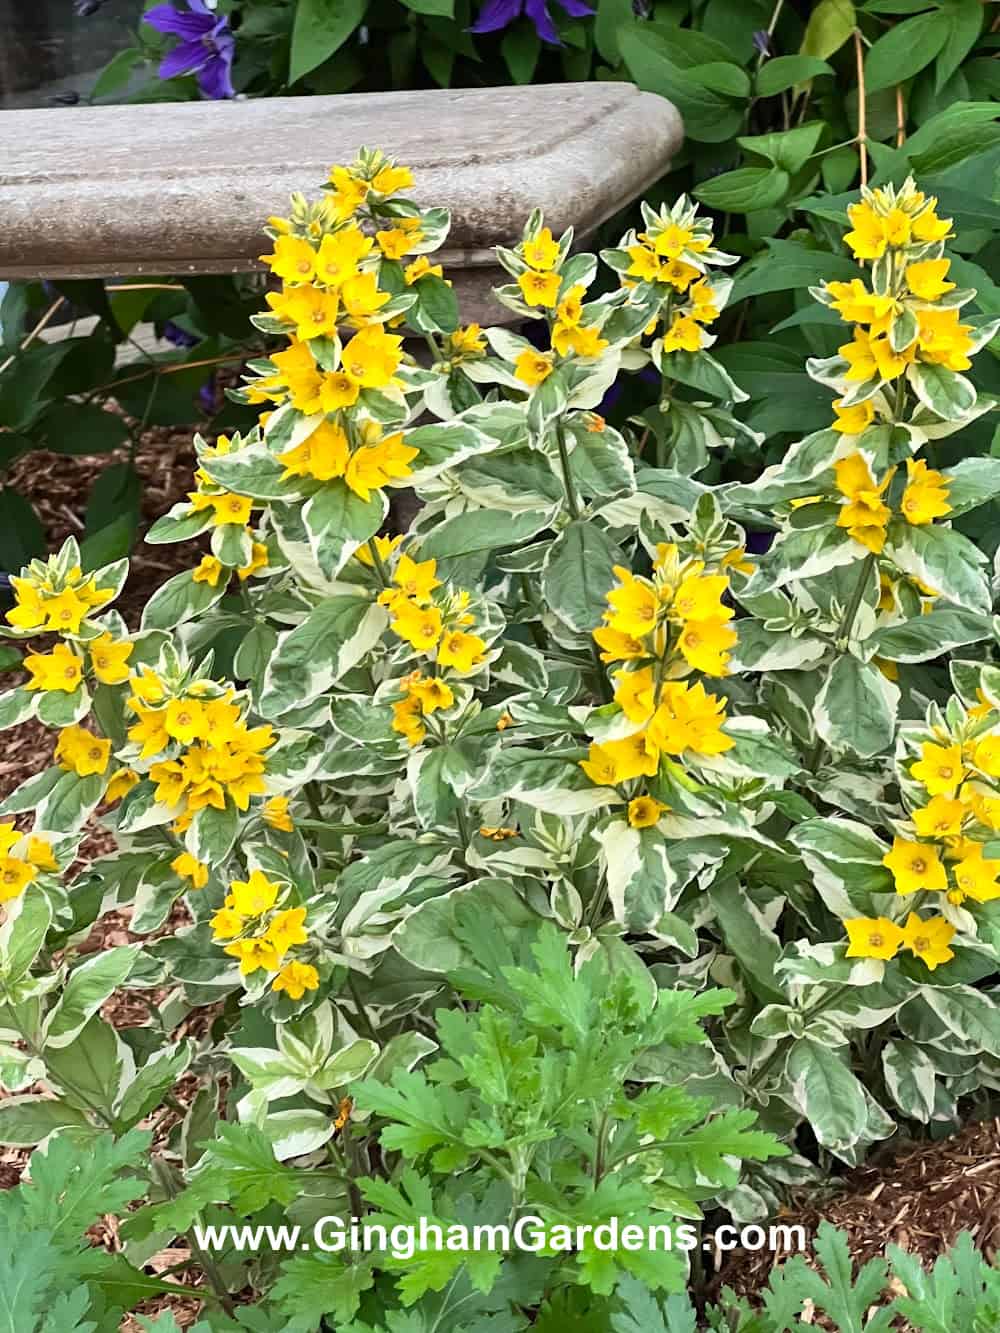 loosestrife Golden Alexander with yellow flowers and variegated foliage